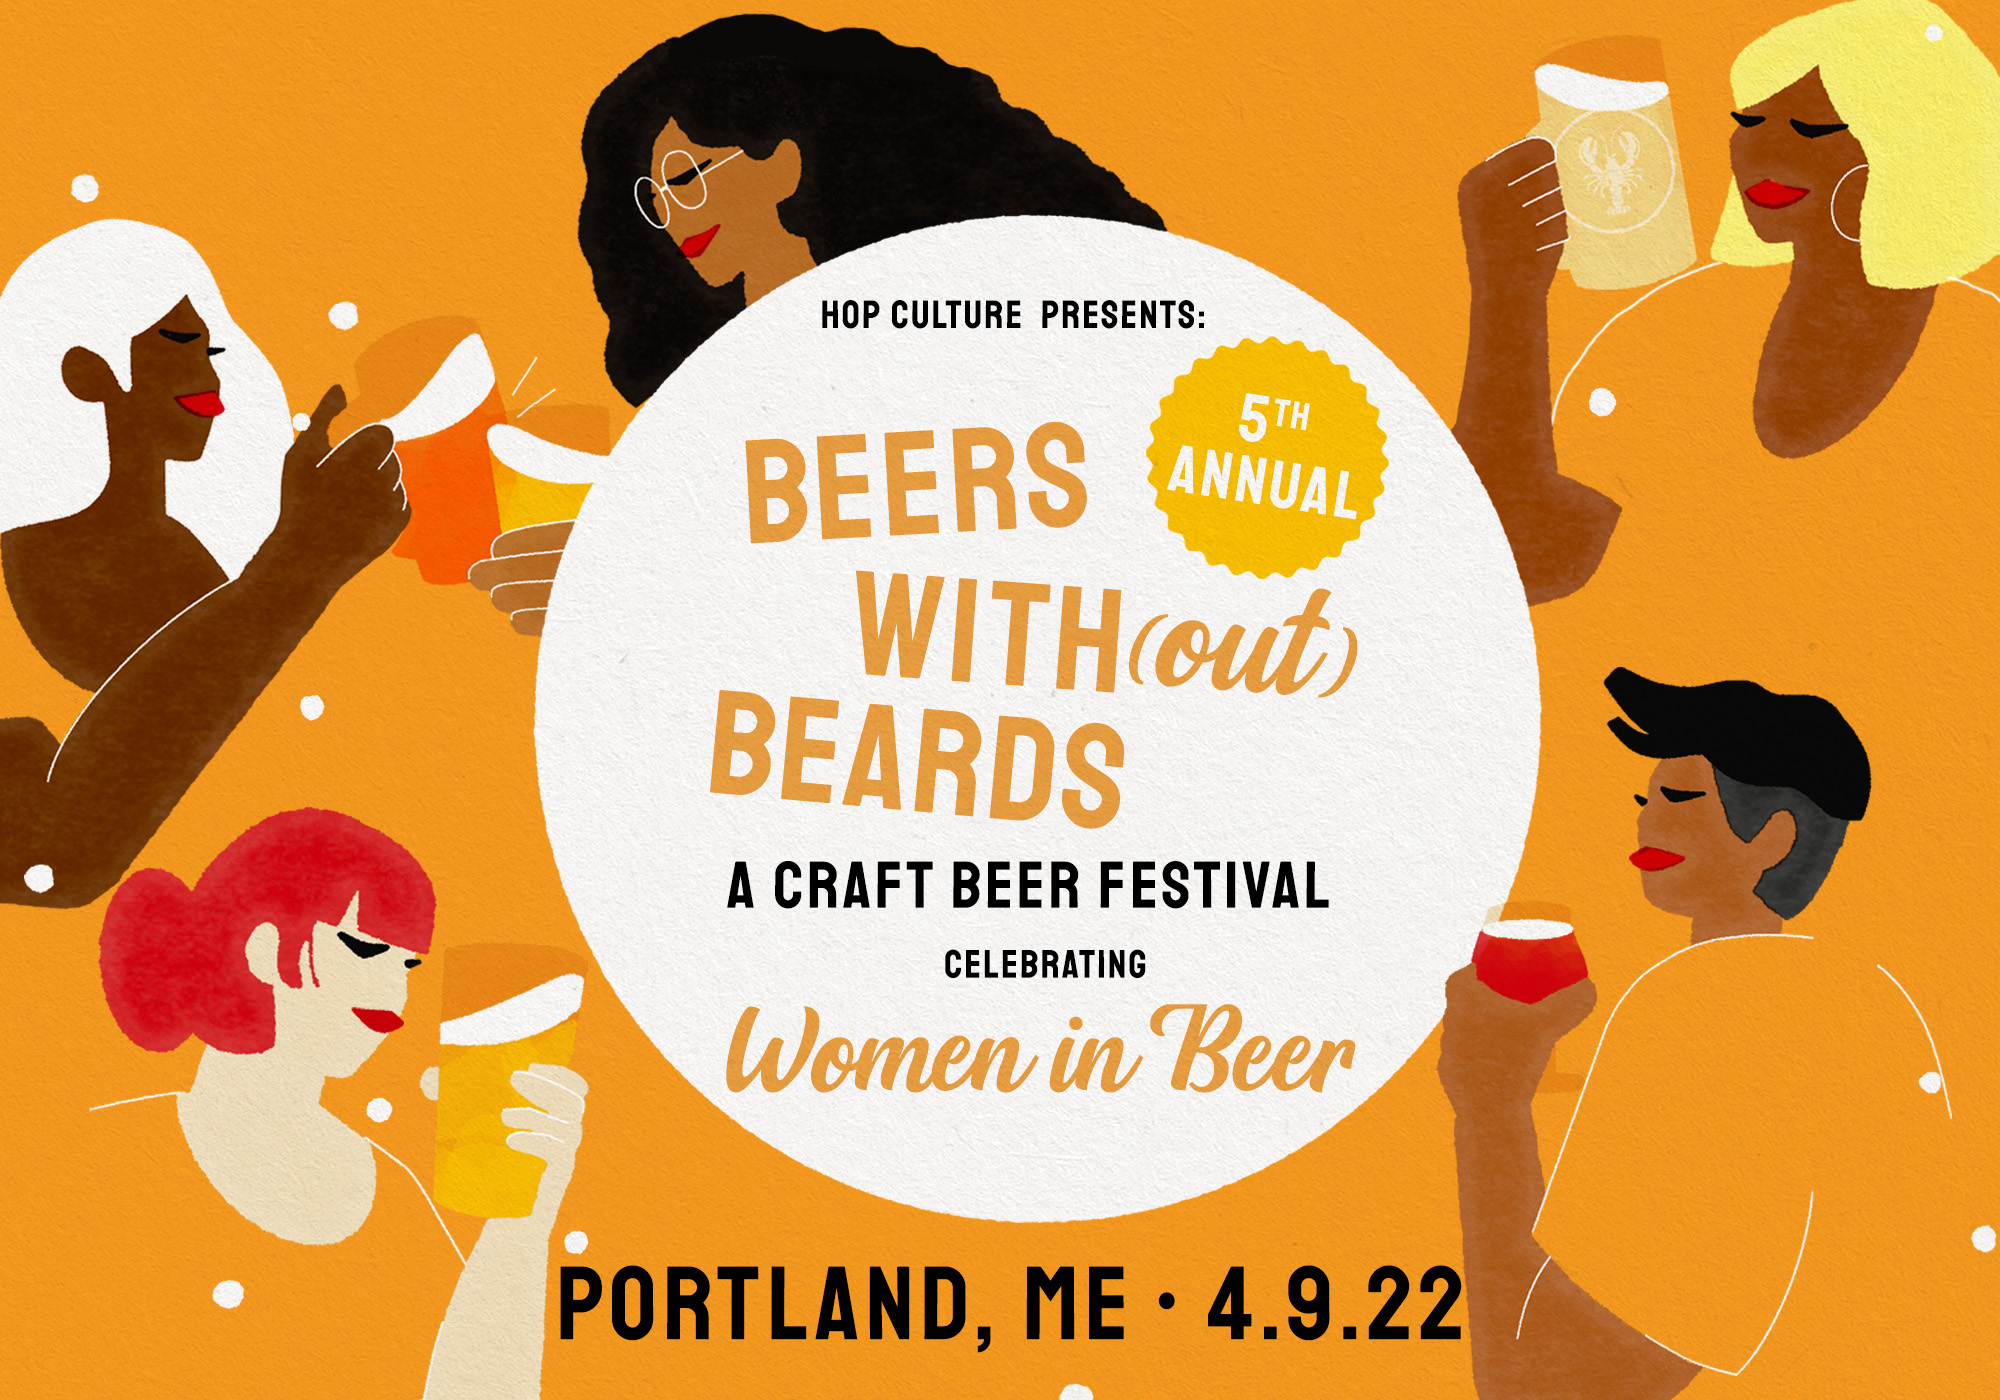 Everything You Need to Know About the 5th Annual Beers With(out) Beards Beer Festival